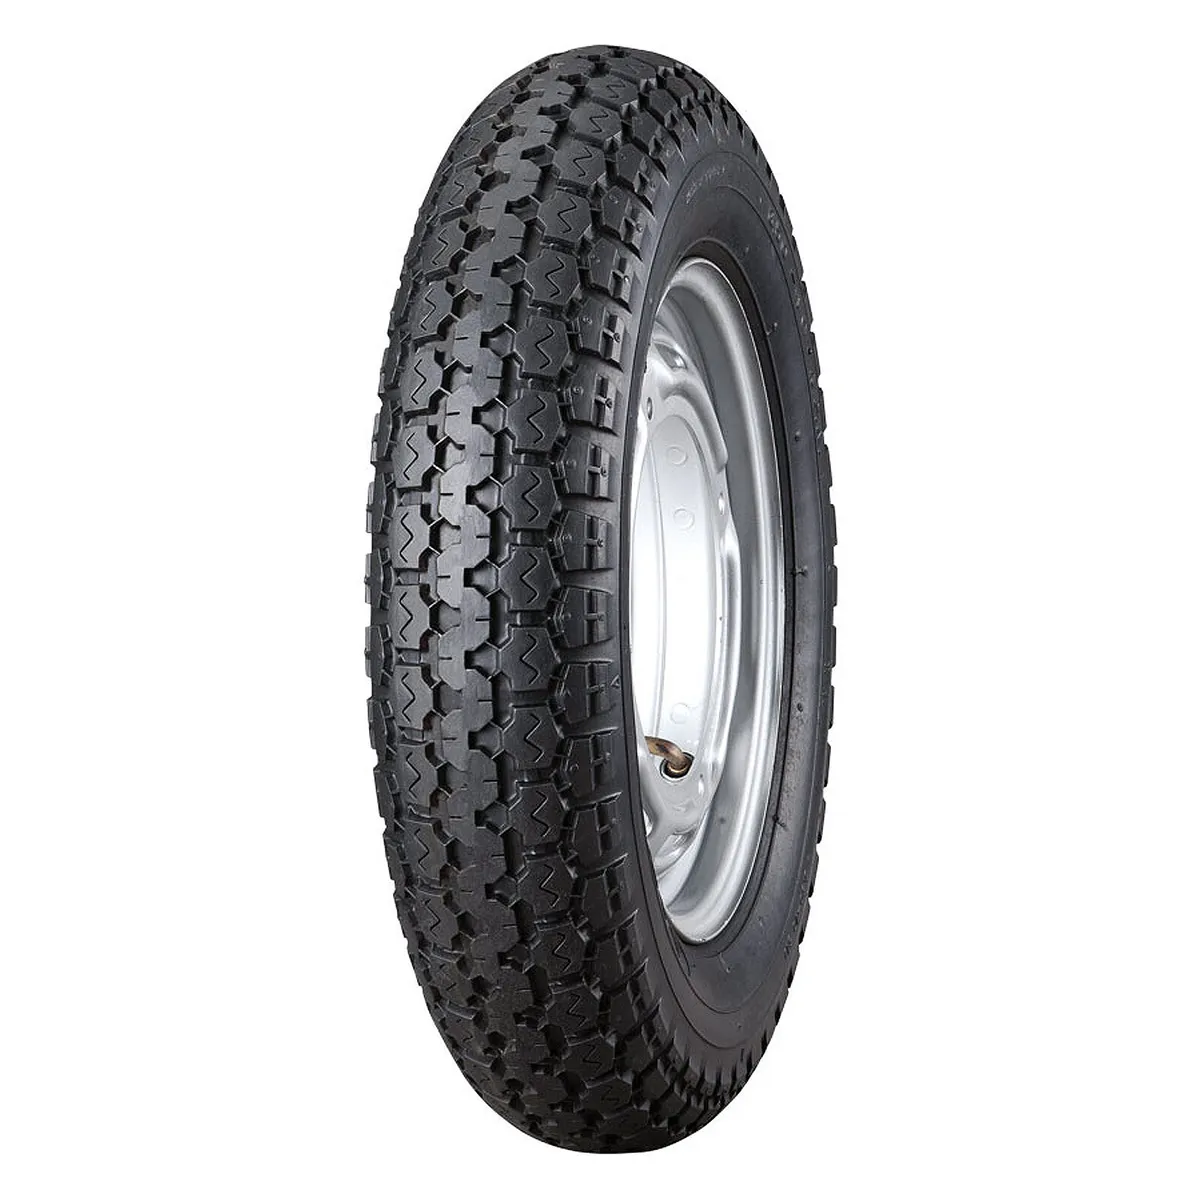 3.50 16 motorcycle tire conversion